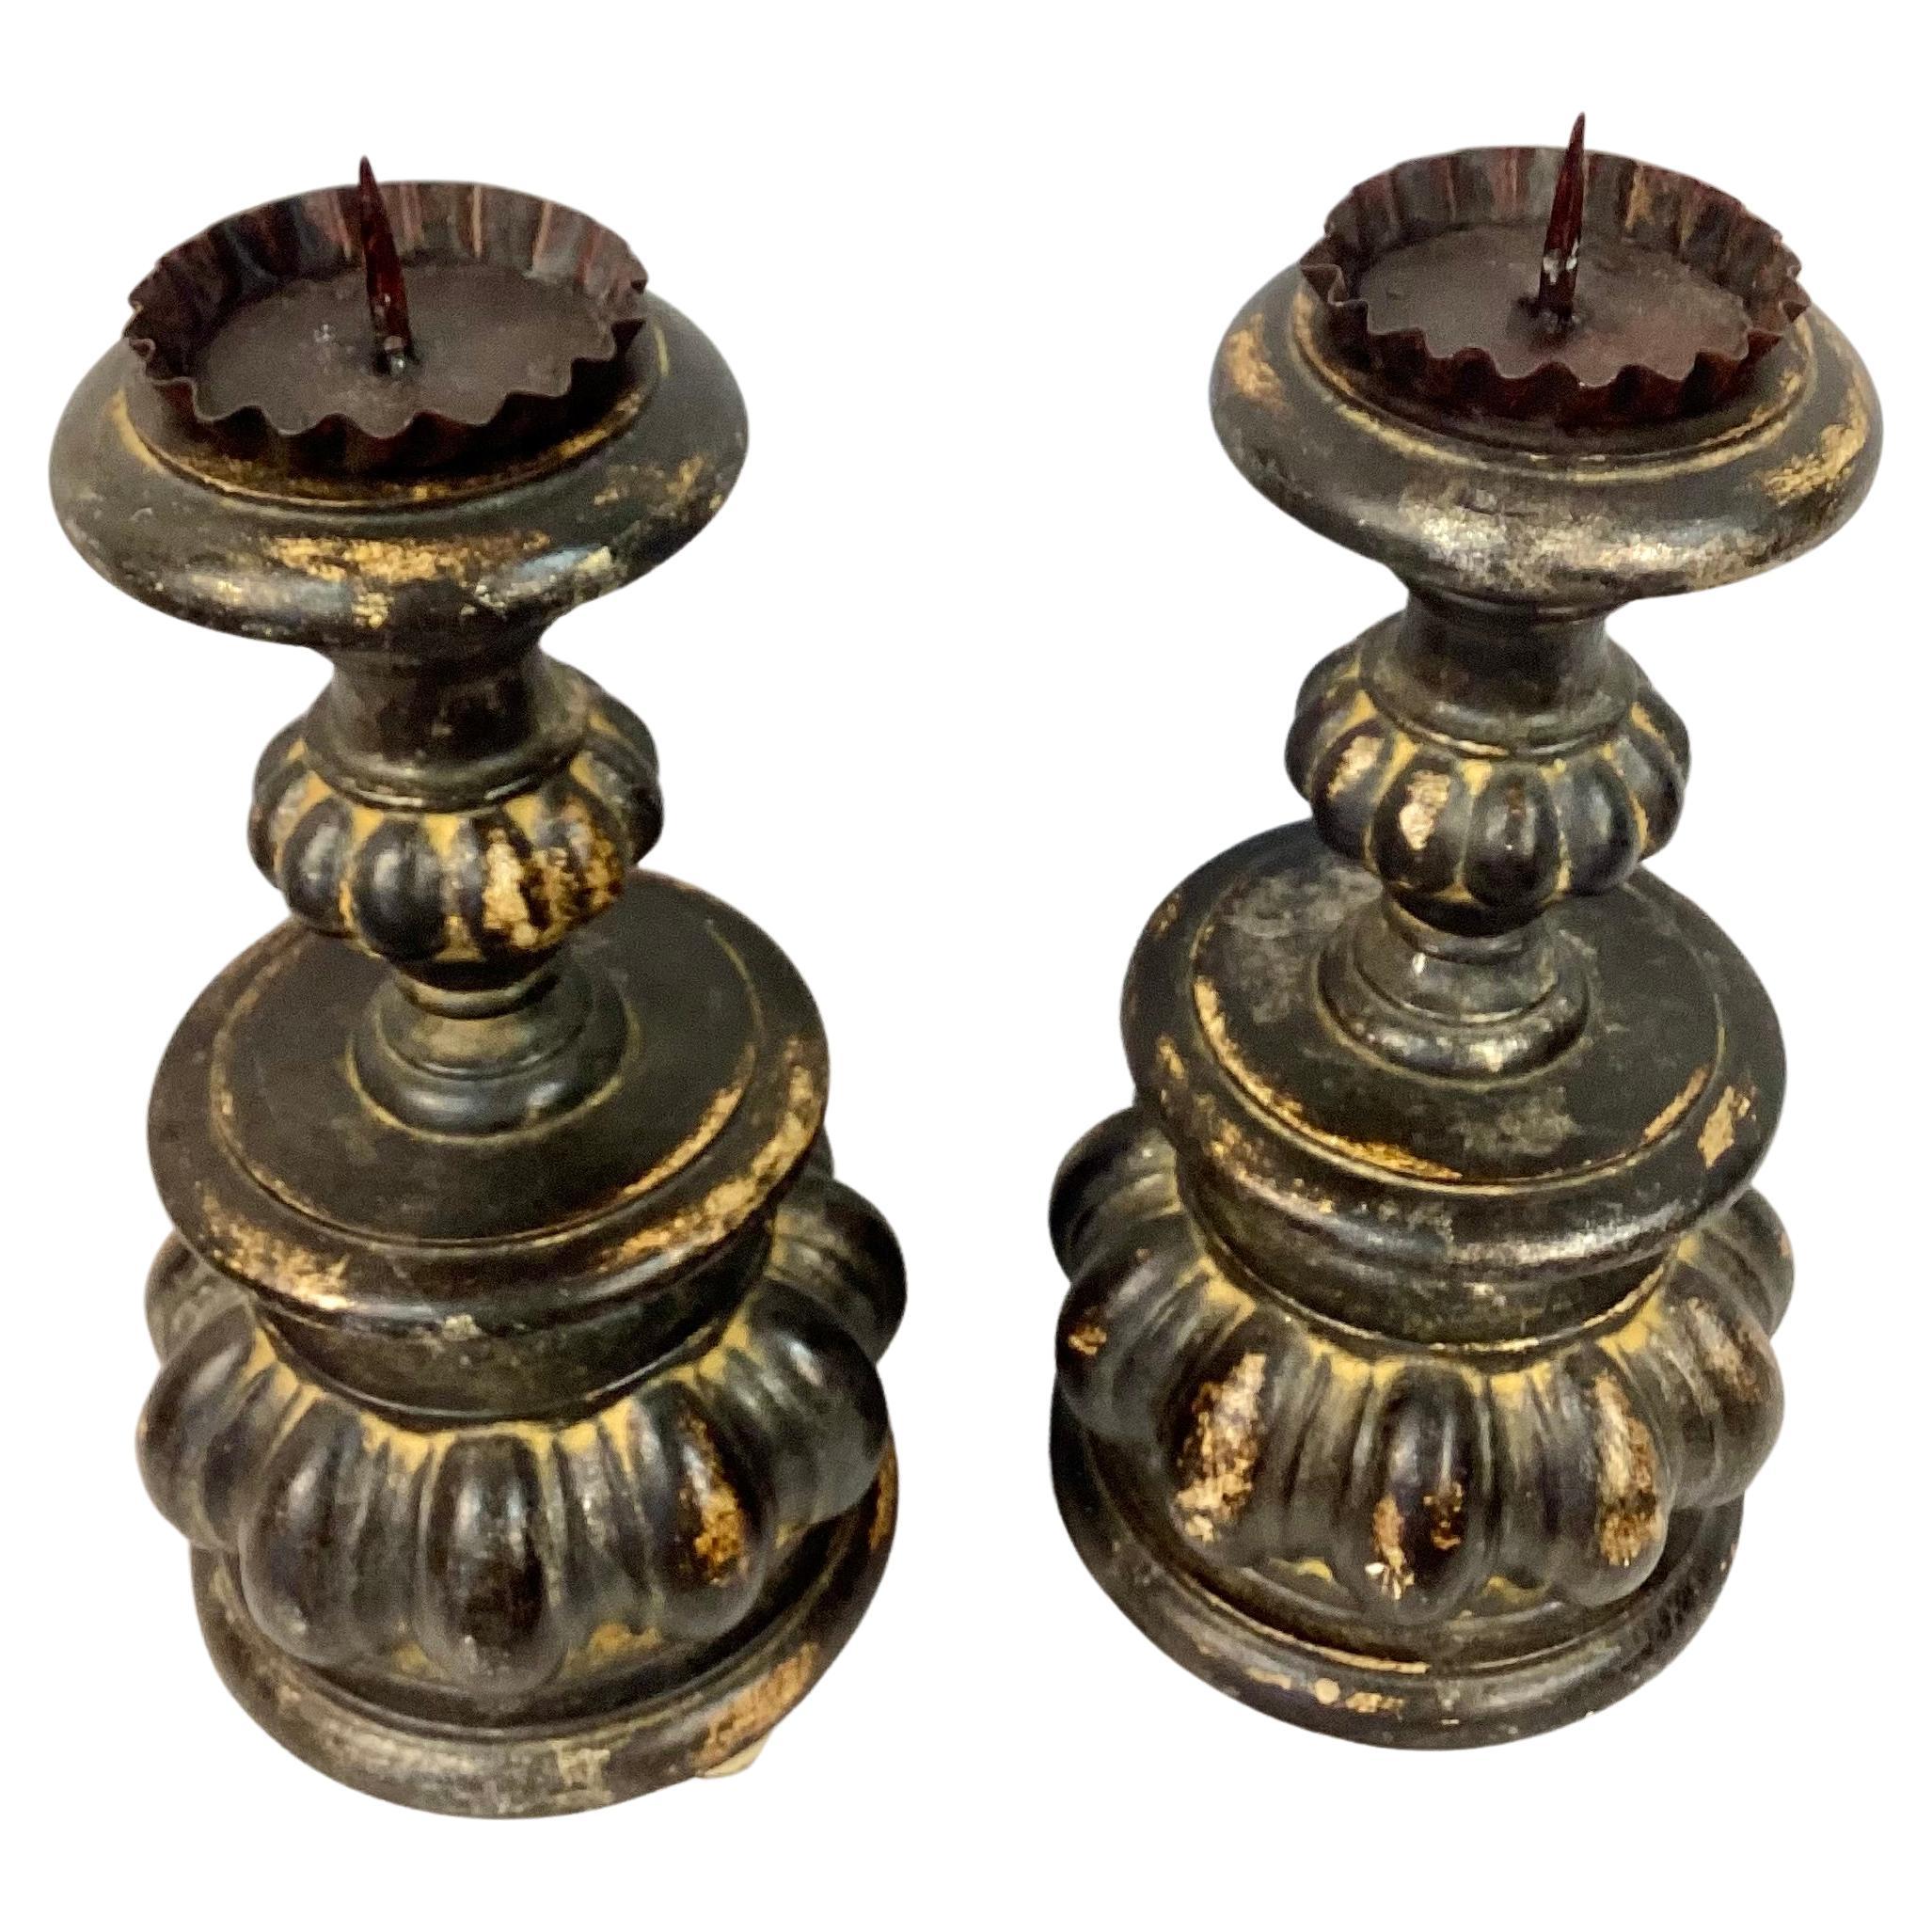 Very nice Pair of 19th Century Italian pillar candleholders. Features beautiful carved bulbous and curved wooden design. Round base. Nice black and tan patina. Wonderful form. 